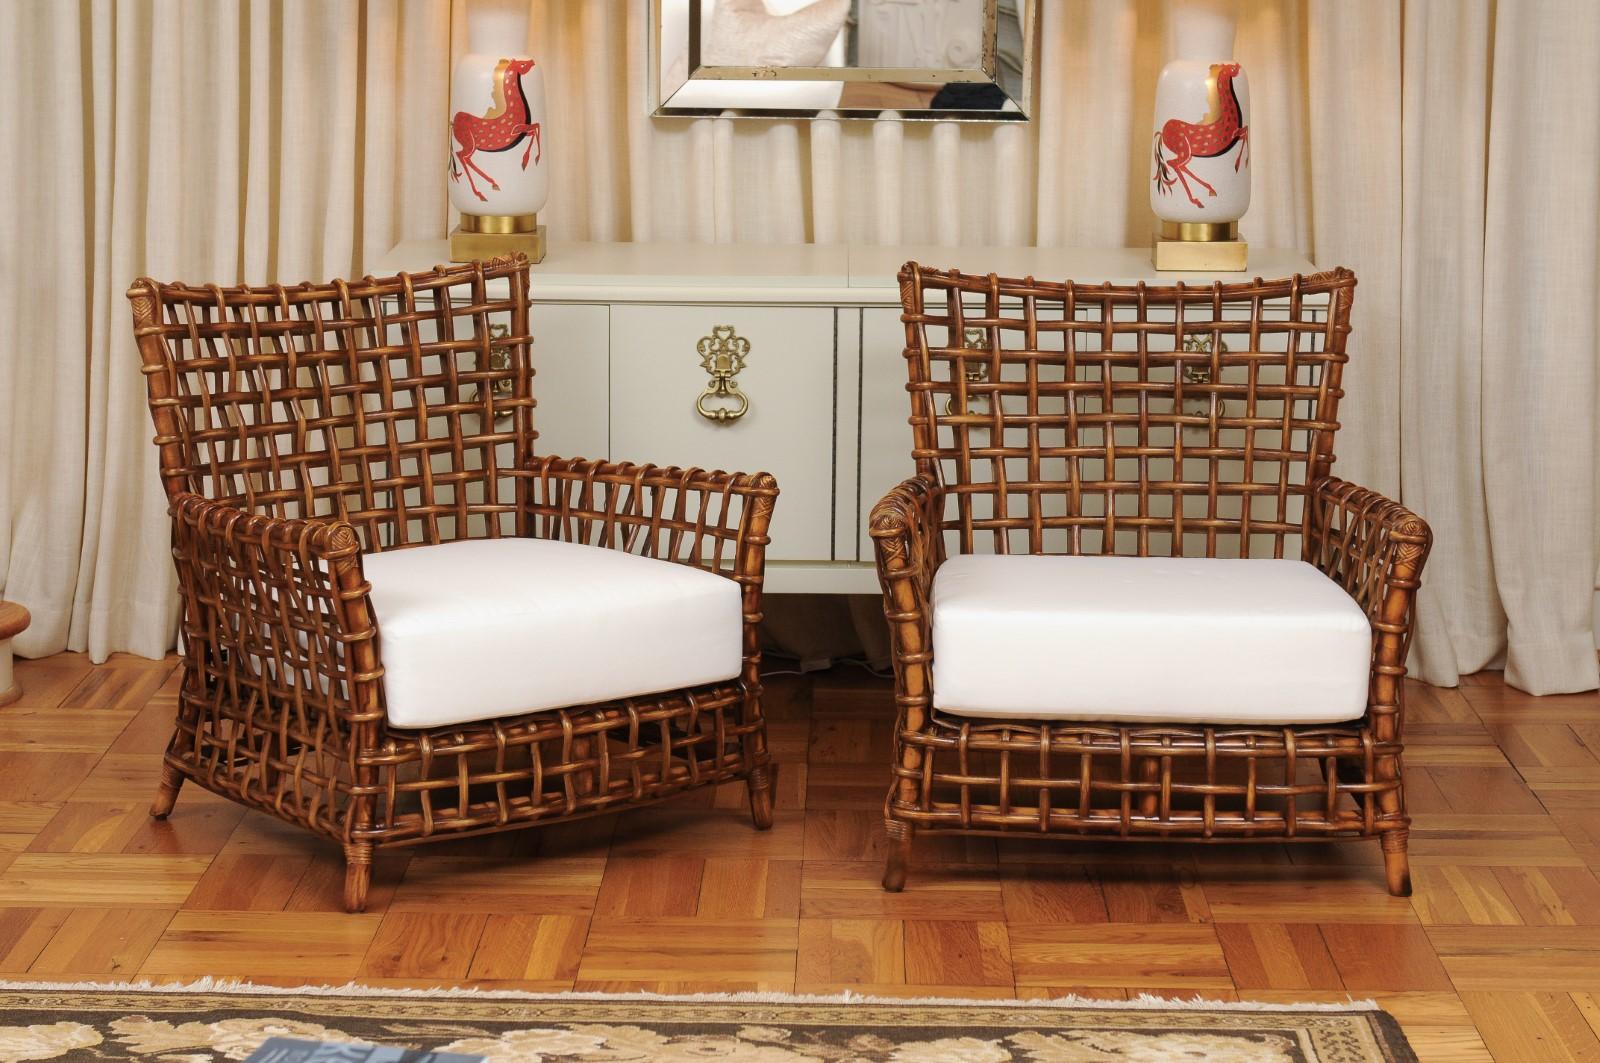 These magnificent club chairs are shipped as professionally photographed and described in the listing narrative: Meticulously professionally restored and installation ready. Expert custom upholstery service is available. Two (2) pair available.

A